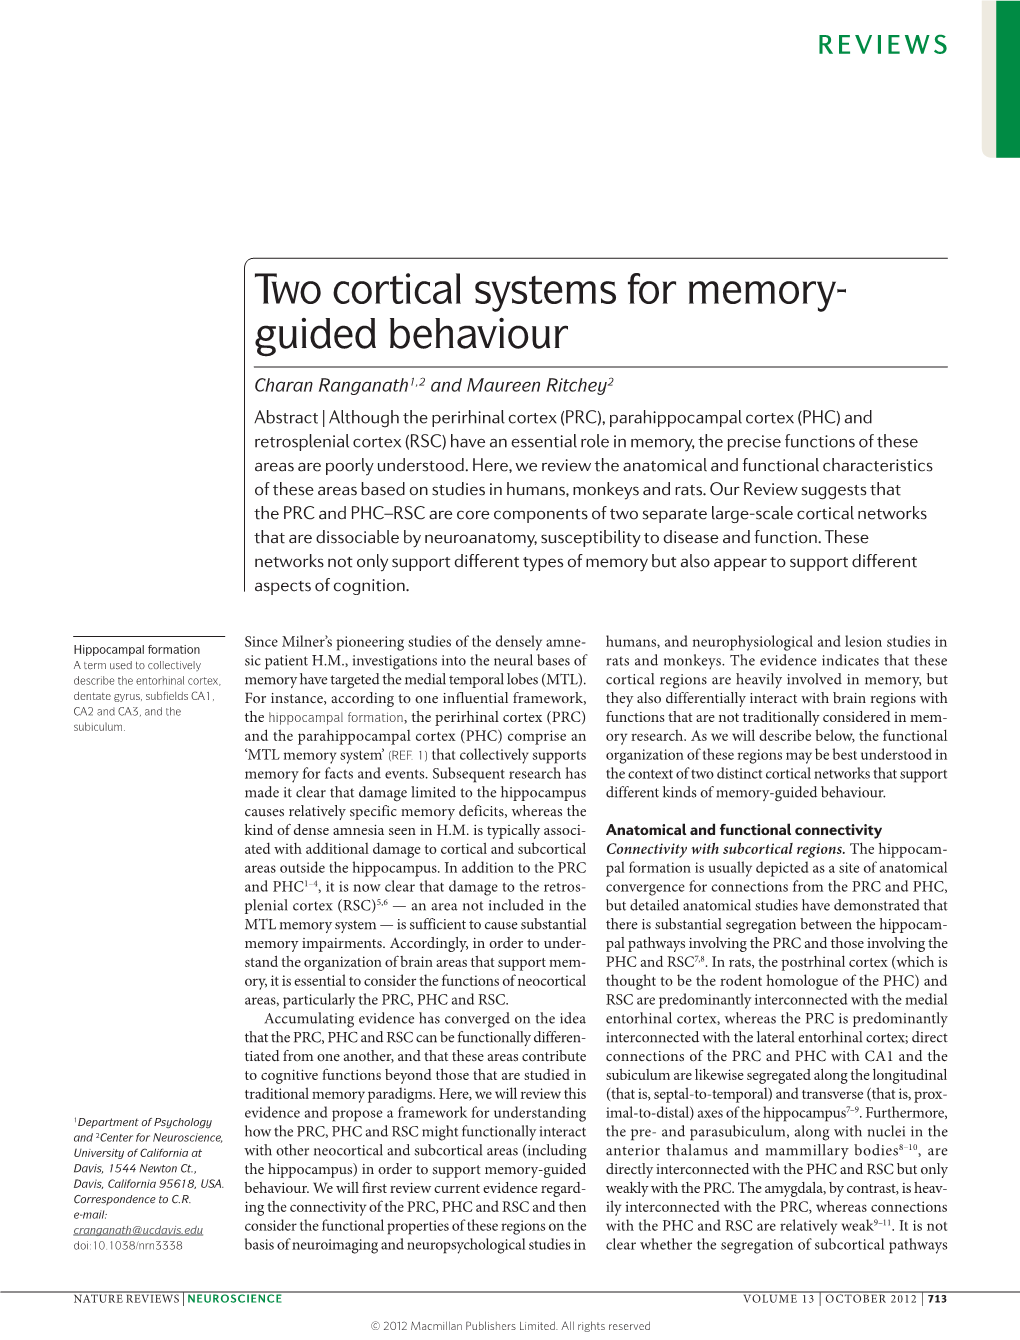 Two Cortical Systems for Memory-Guided Behaviour